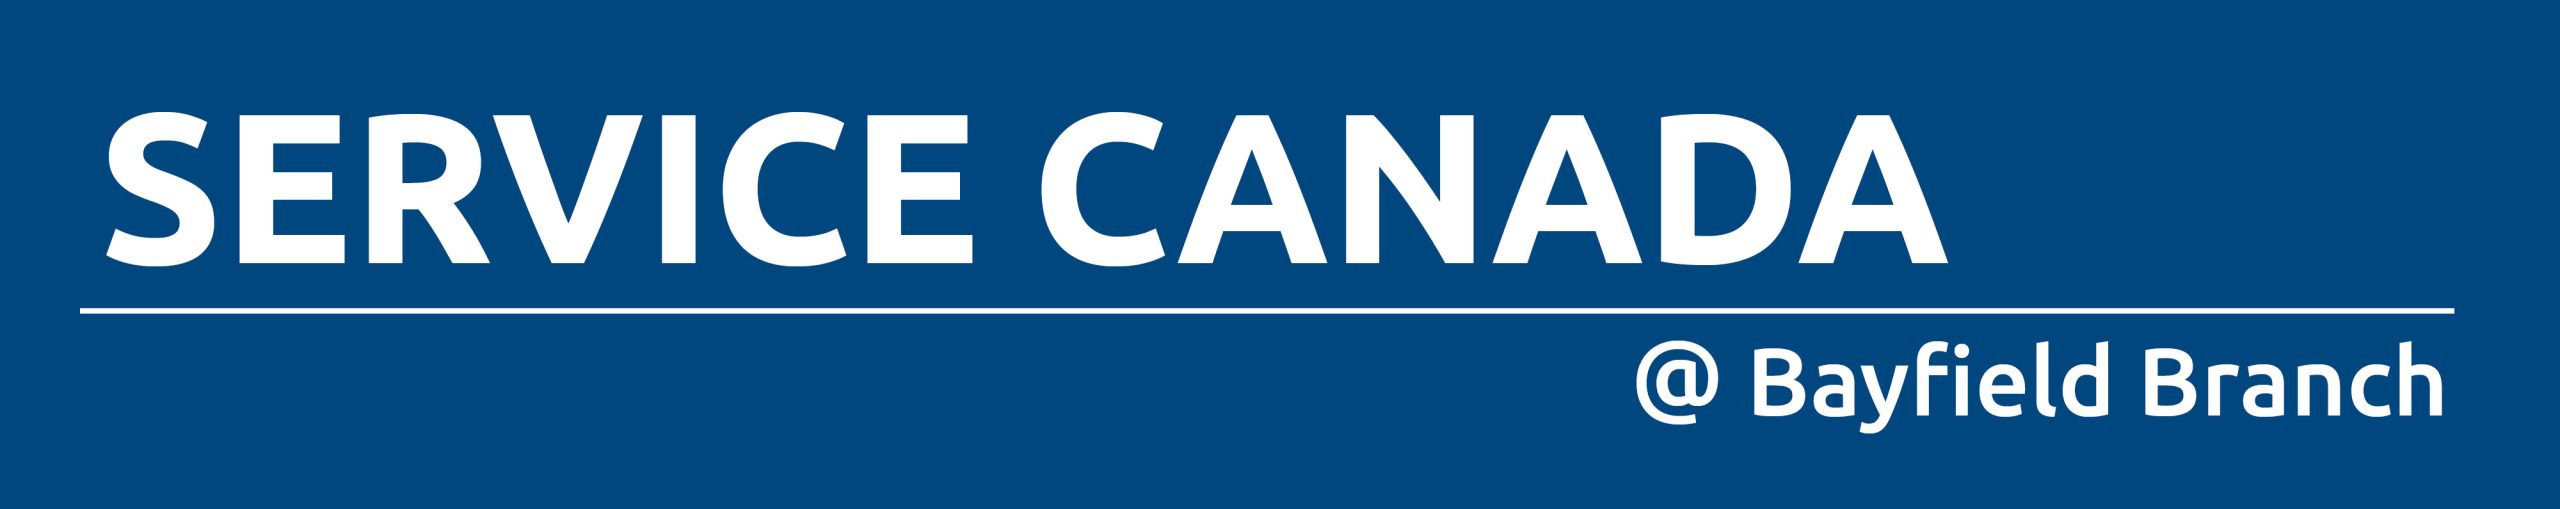 Dark blue rectangle with white text promoting Service Canada at the Bayfield Branch